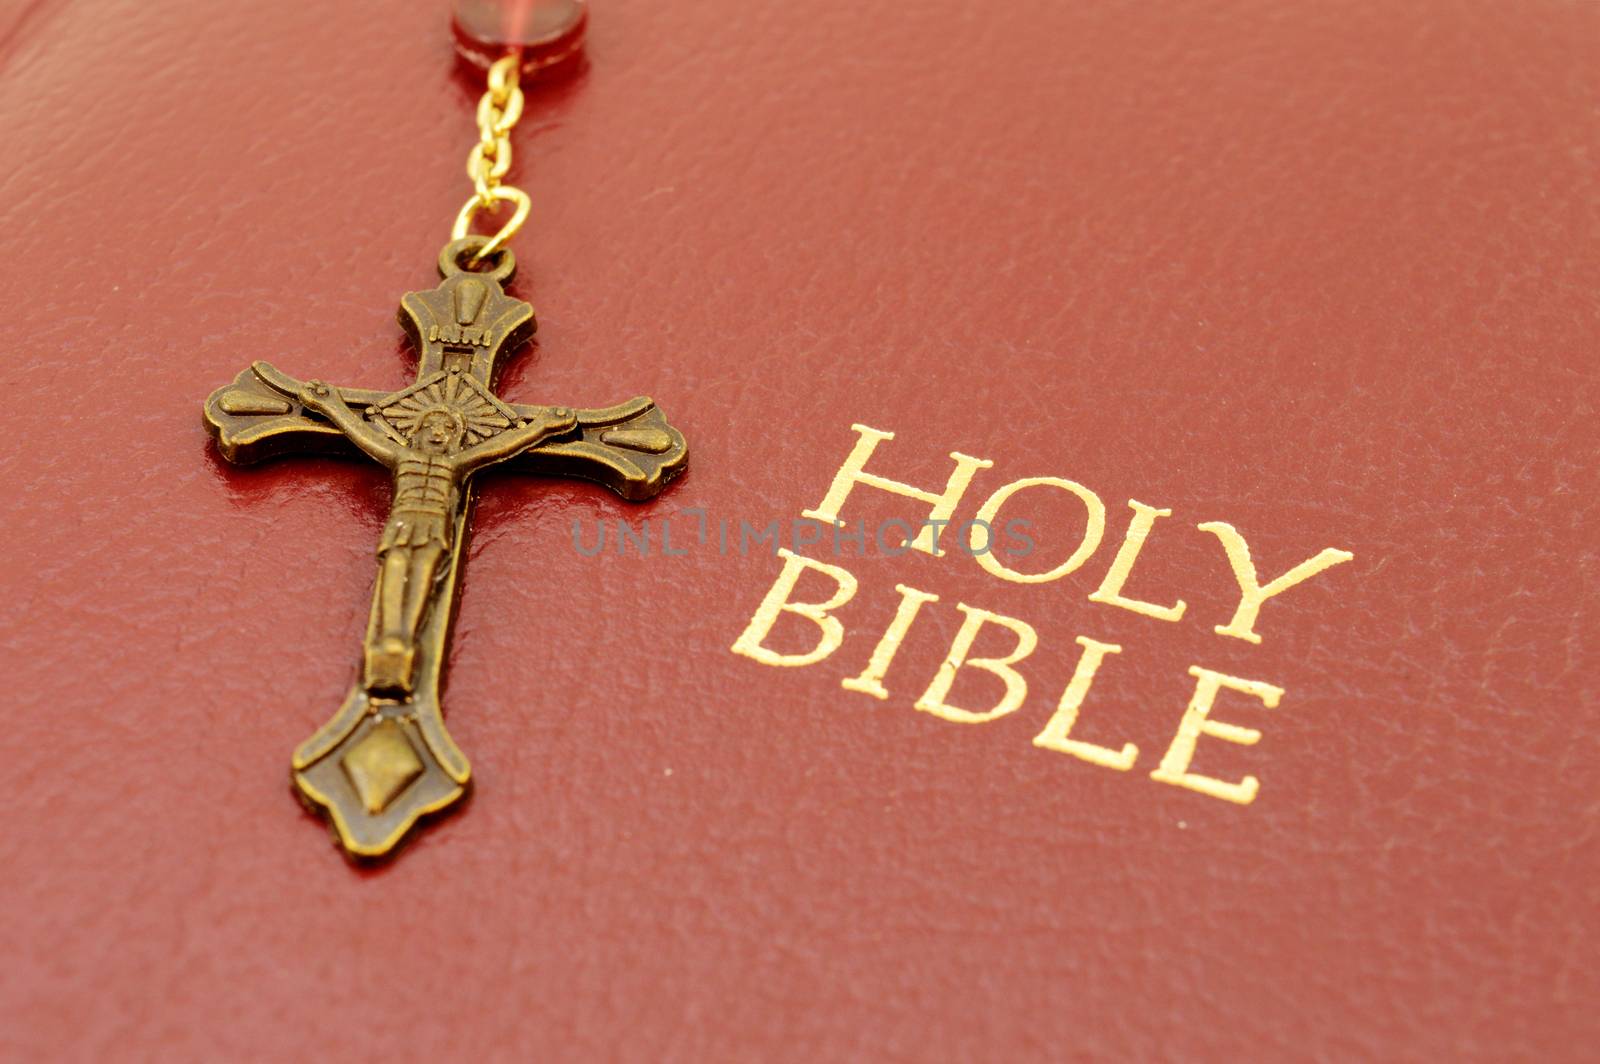 A closeup of a rosary cross and the Holy Bible book title printed in gold foil.